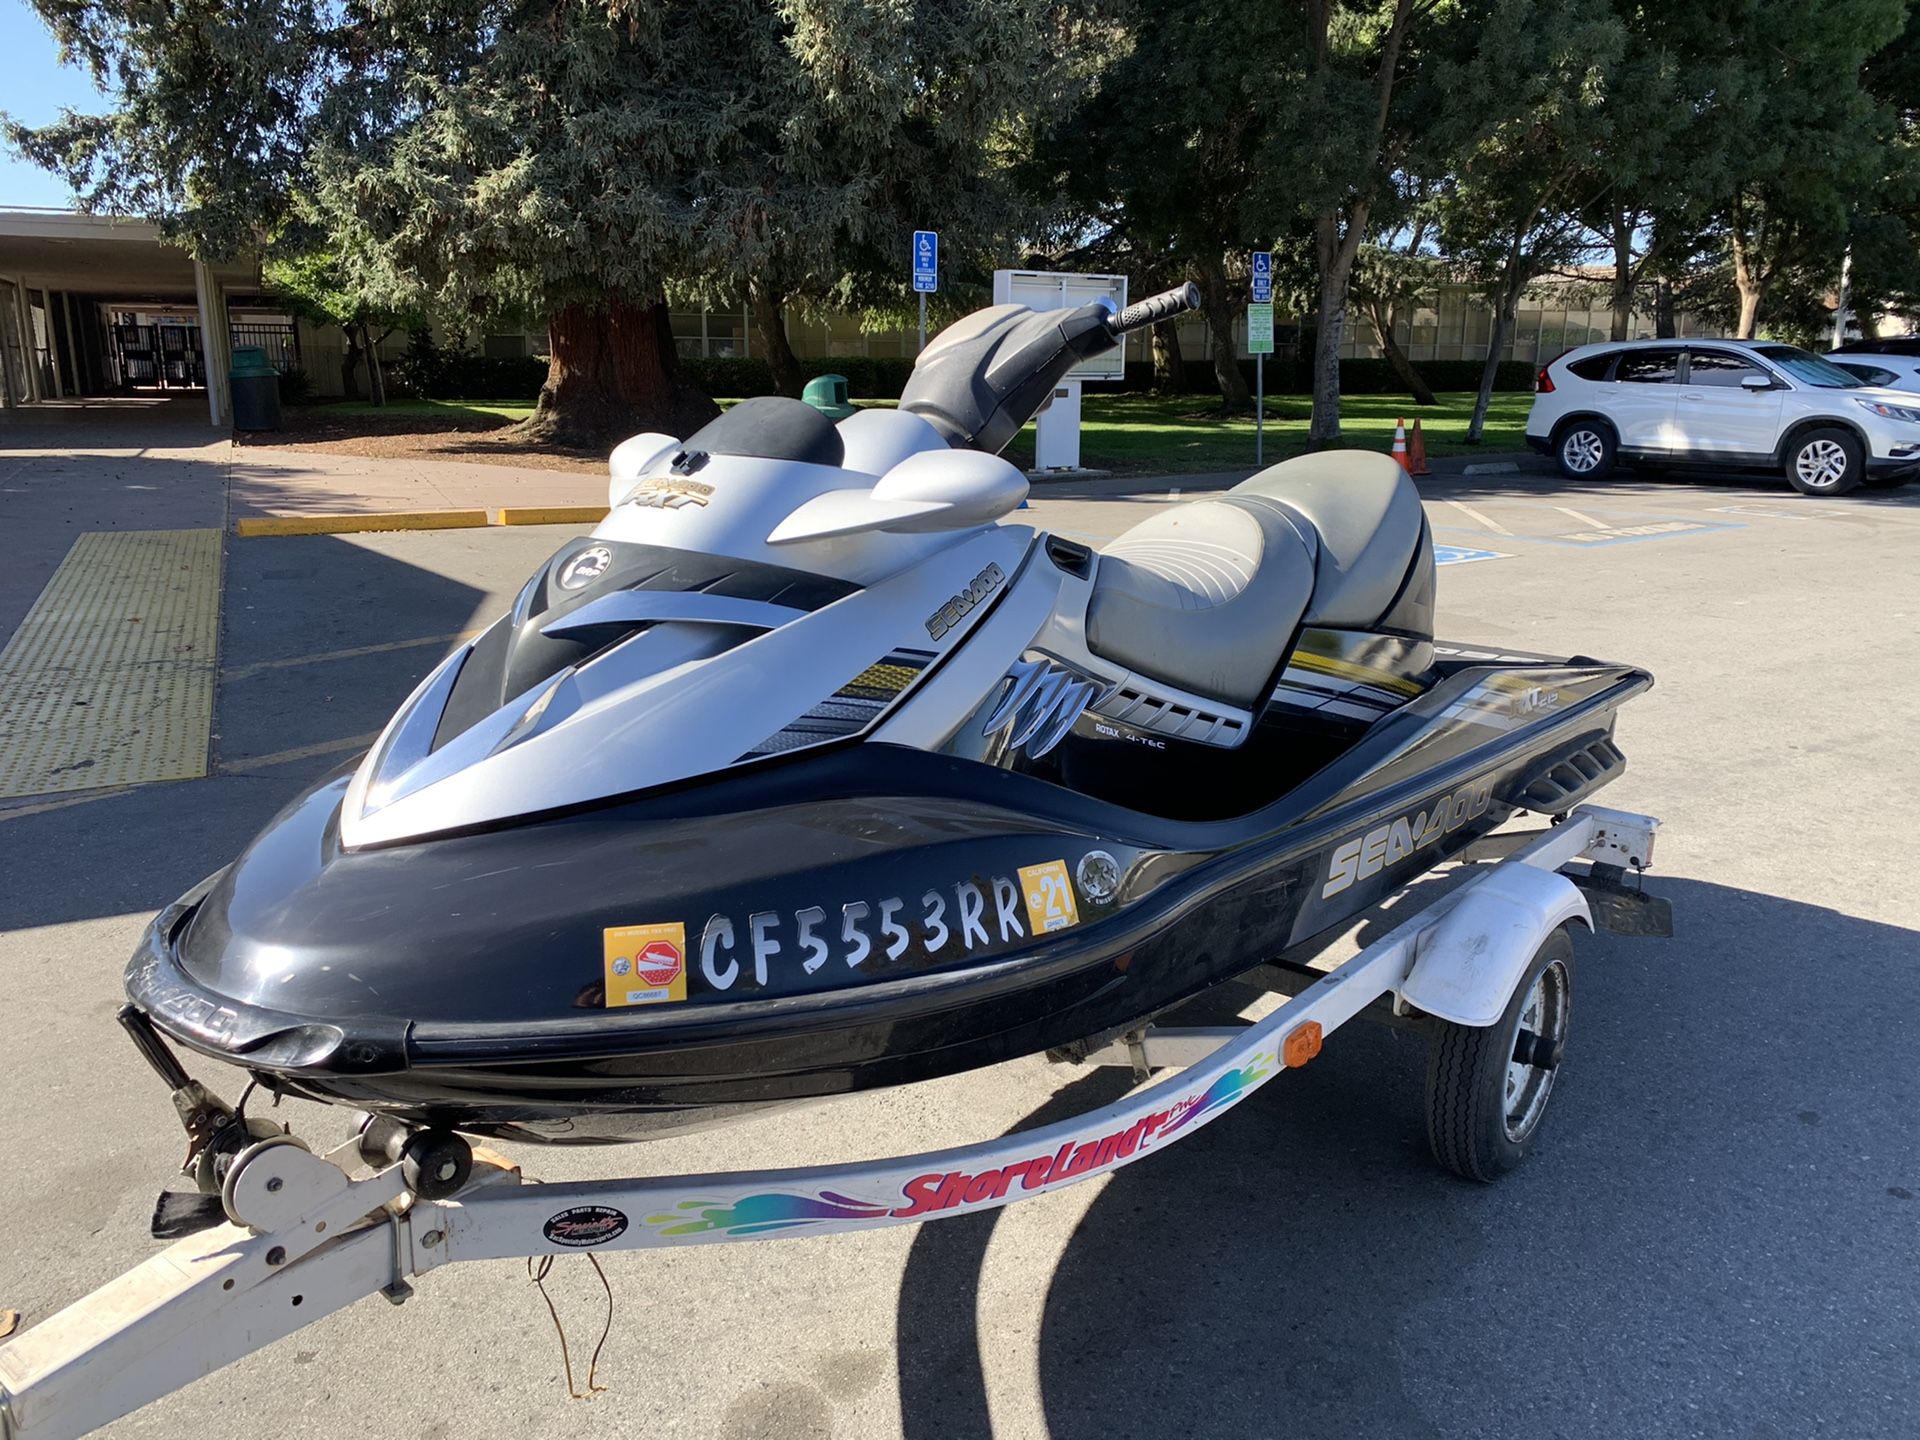 2008 Seadoo RXT215 Supercharged - GREAT PRICE!!